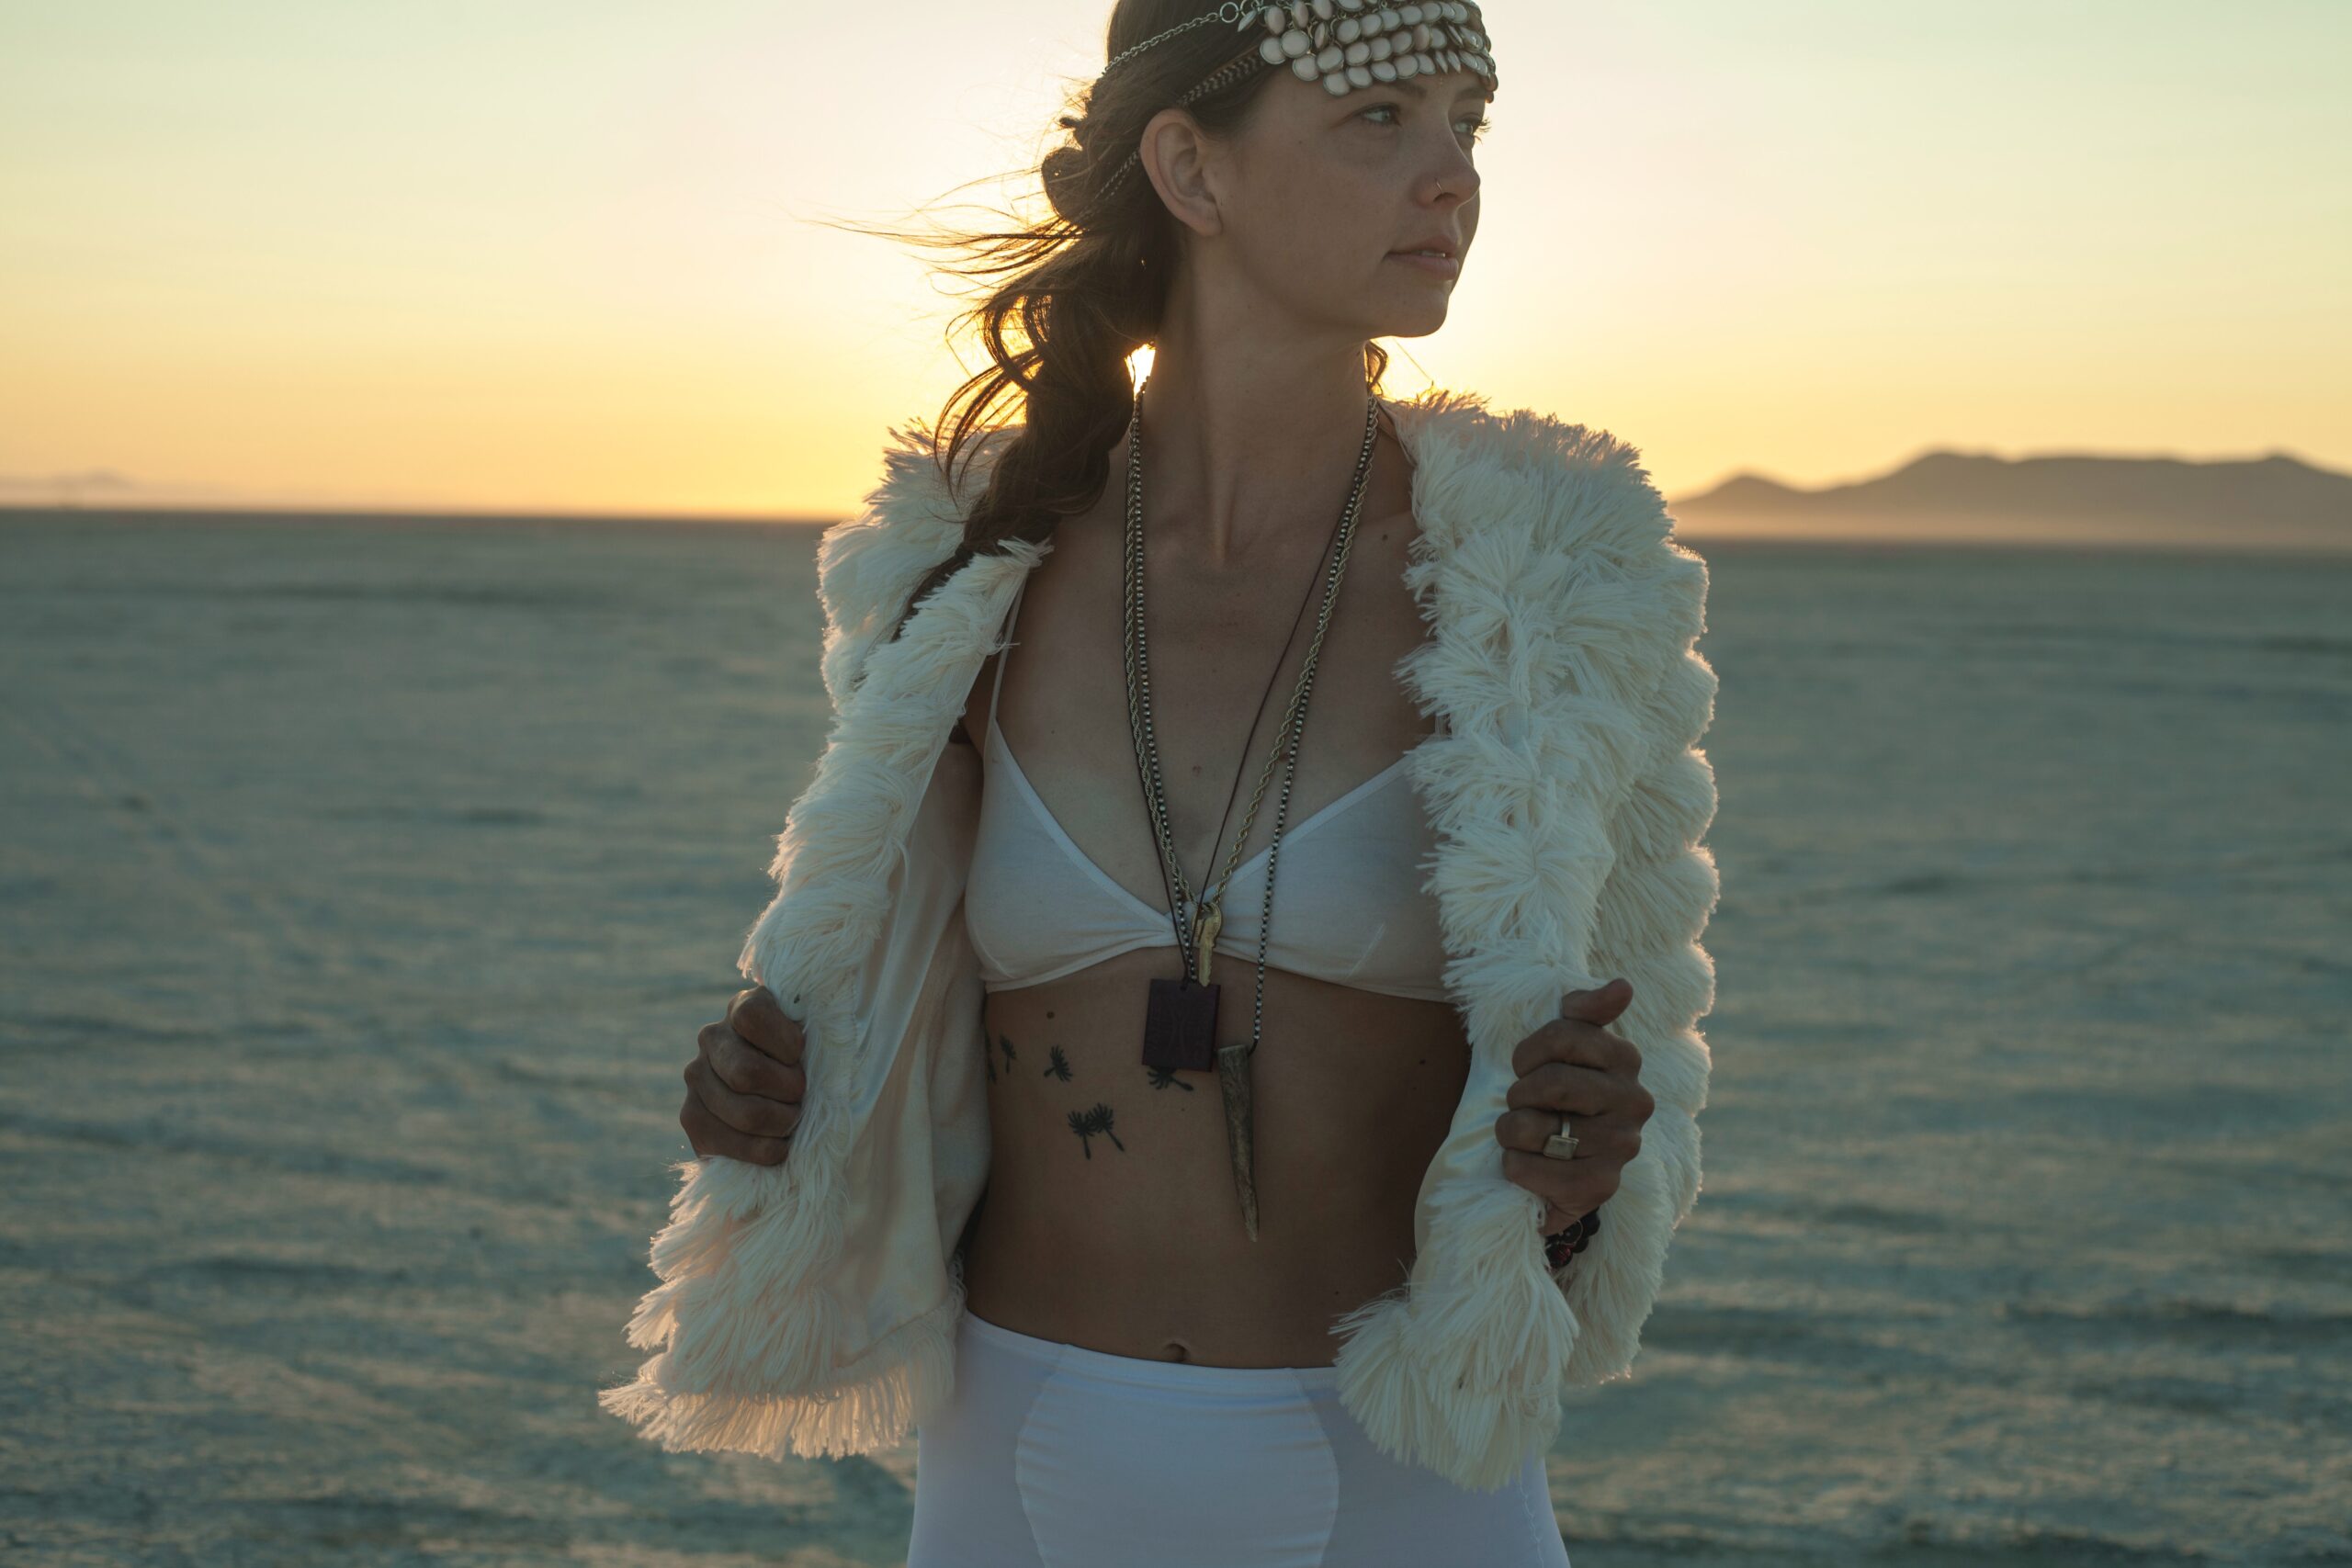 Best Coachella Outfit Ideas For Women That Are Stylish